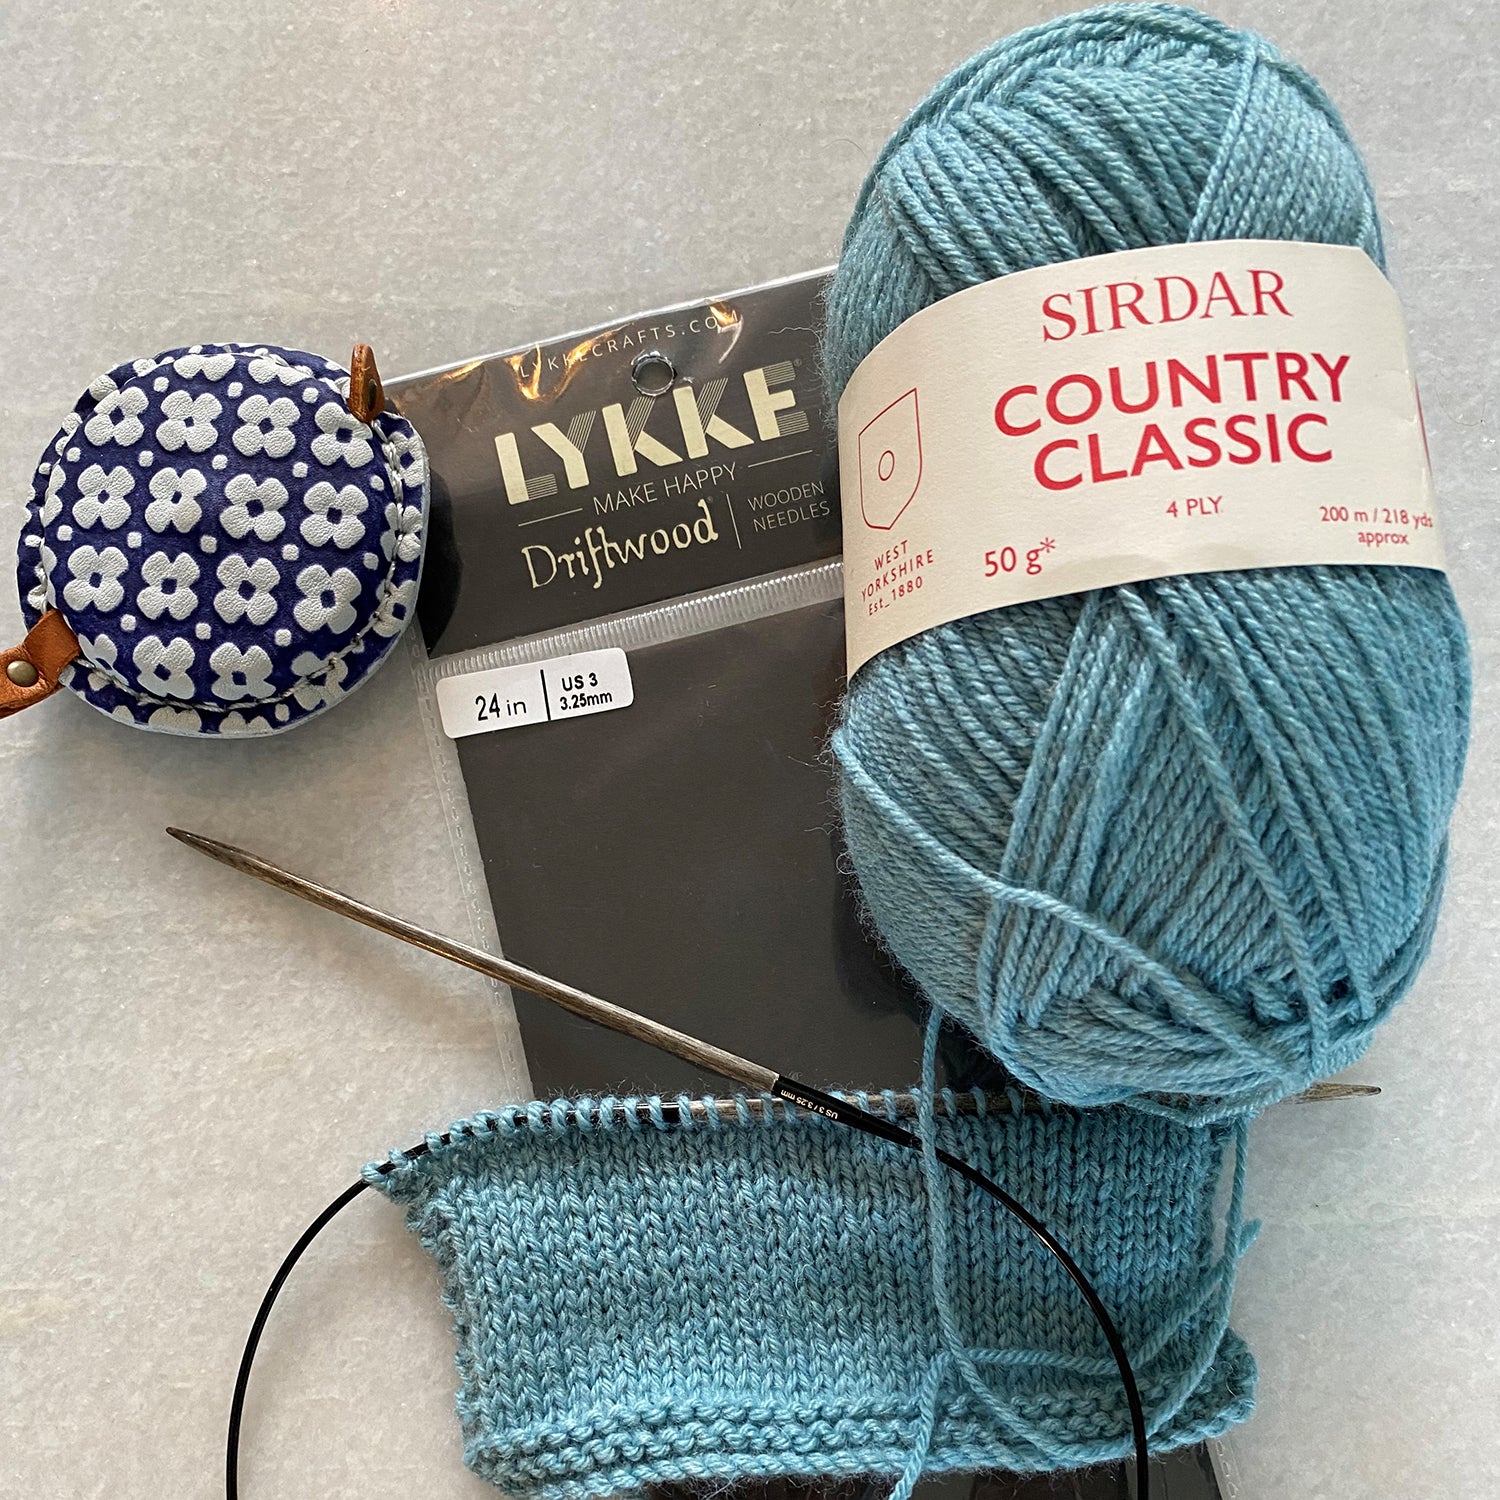 How to decide what to make - Choosing knitting and crochet projects